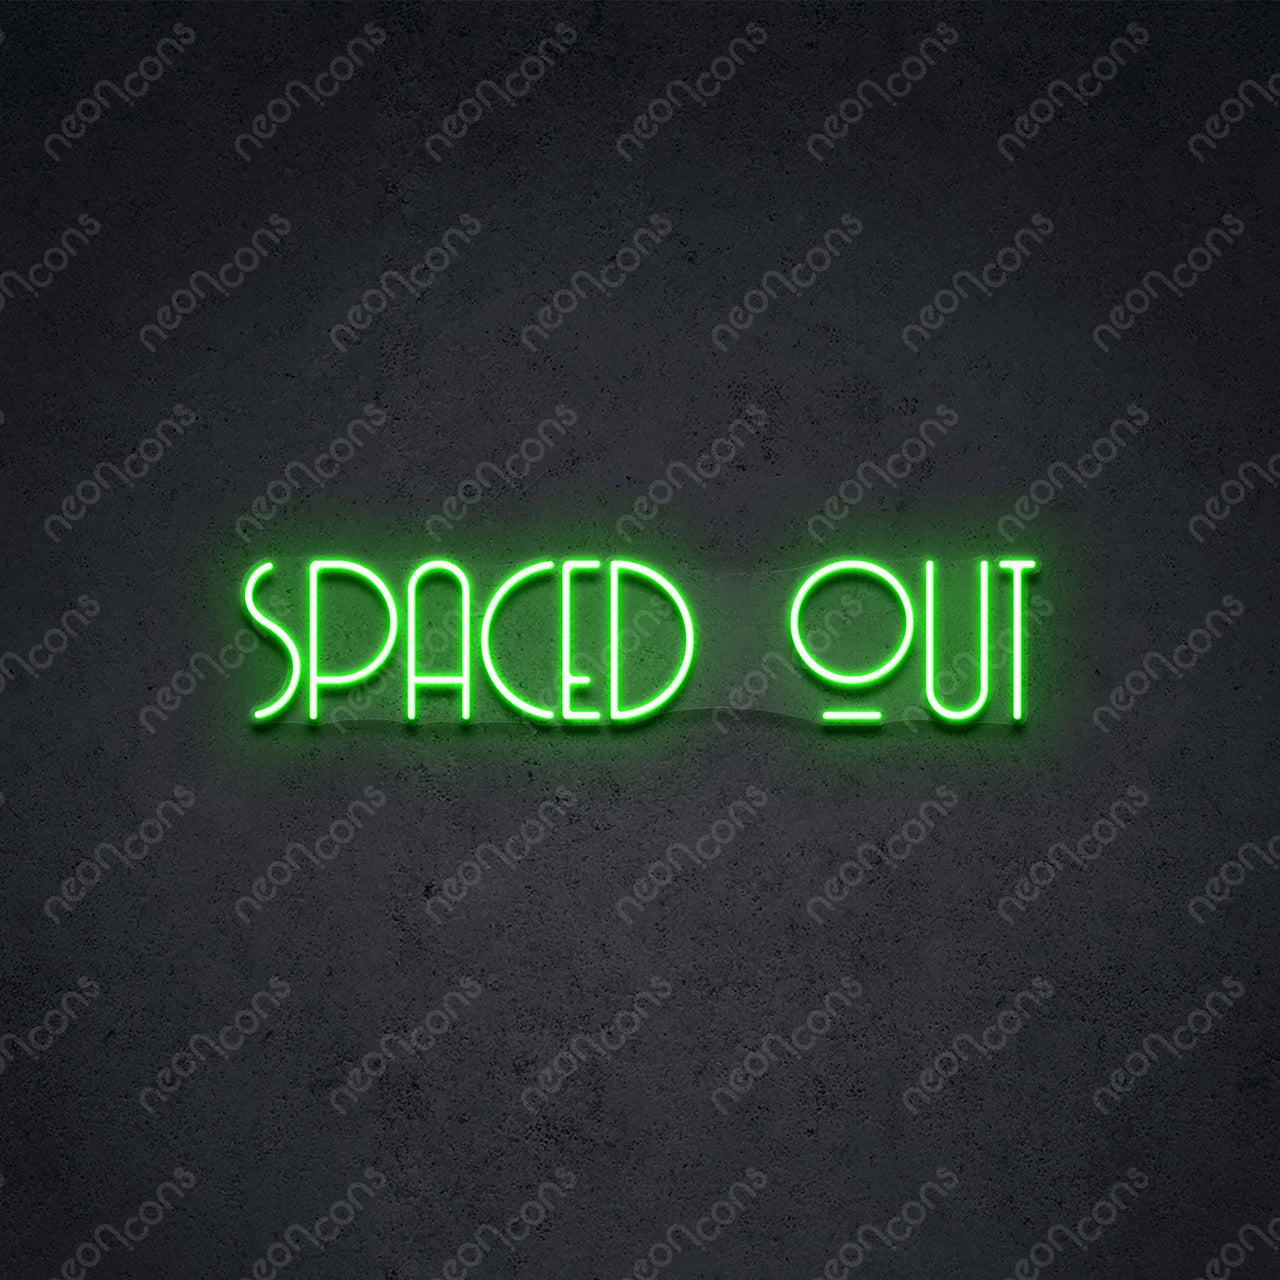 "Spaced Out" LED Neon